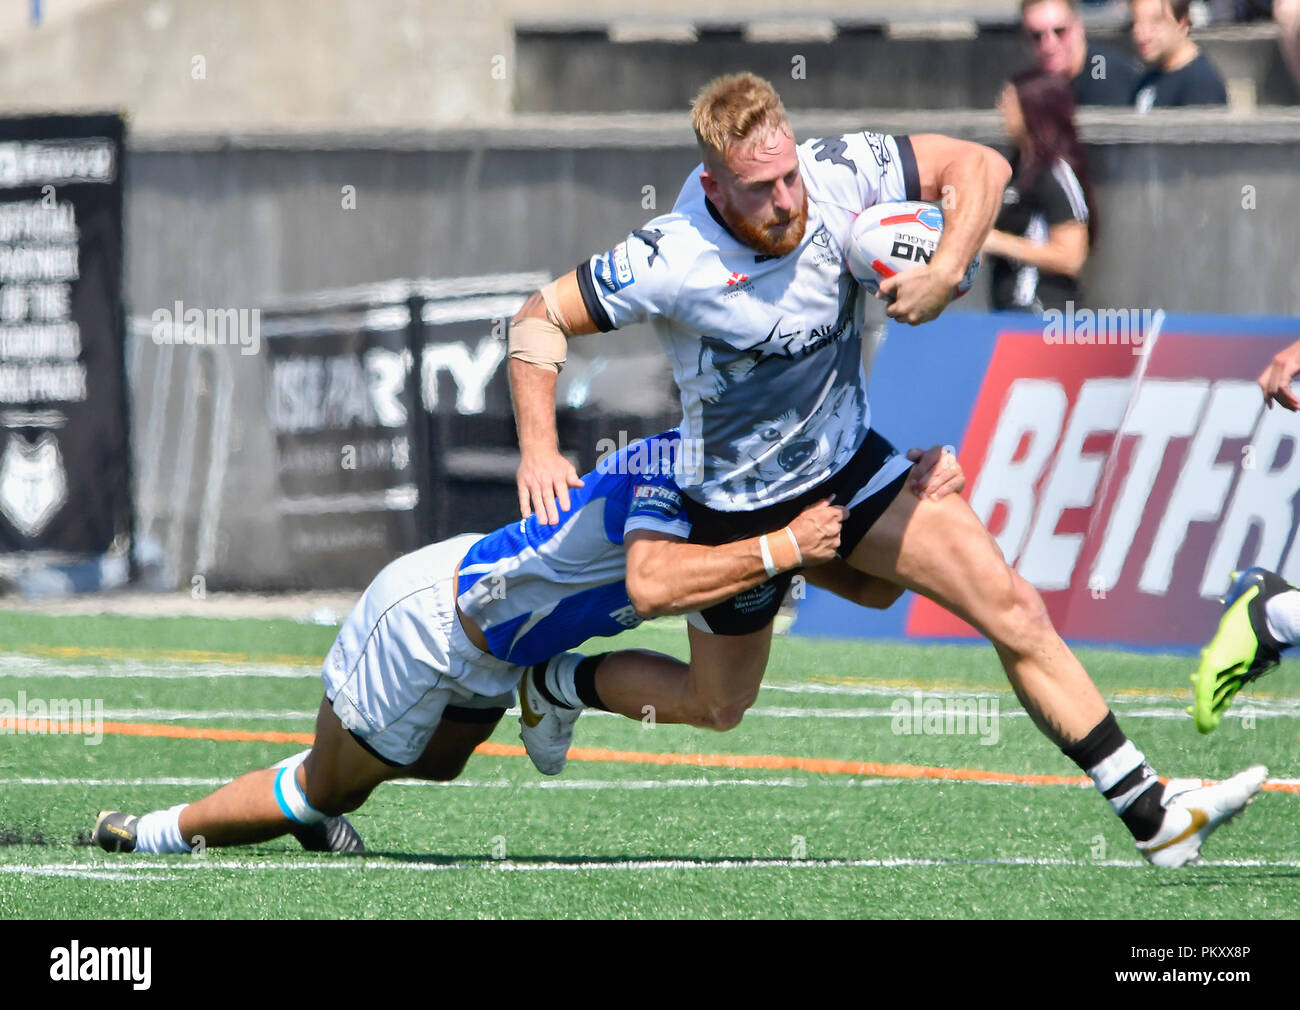 Lamport Stadium, Toronto, Ontario, Canada, 15th September 2018.   Gary Wheeler of Toronto Wolfpack on the attack against Toulouse Olympique during Toronto Wolfpack v Toulouse Olympique in the Super 8's The Qualifiers.   Credit: Touchlinepics/Alamy Live News Stock Photo